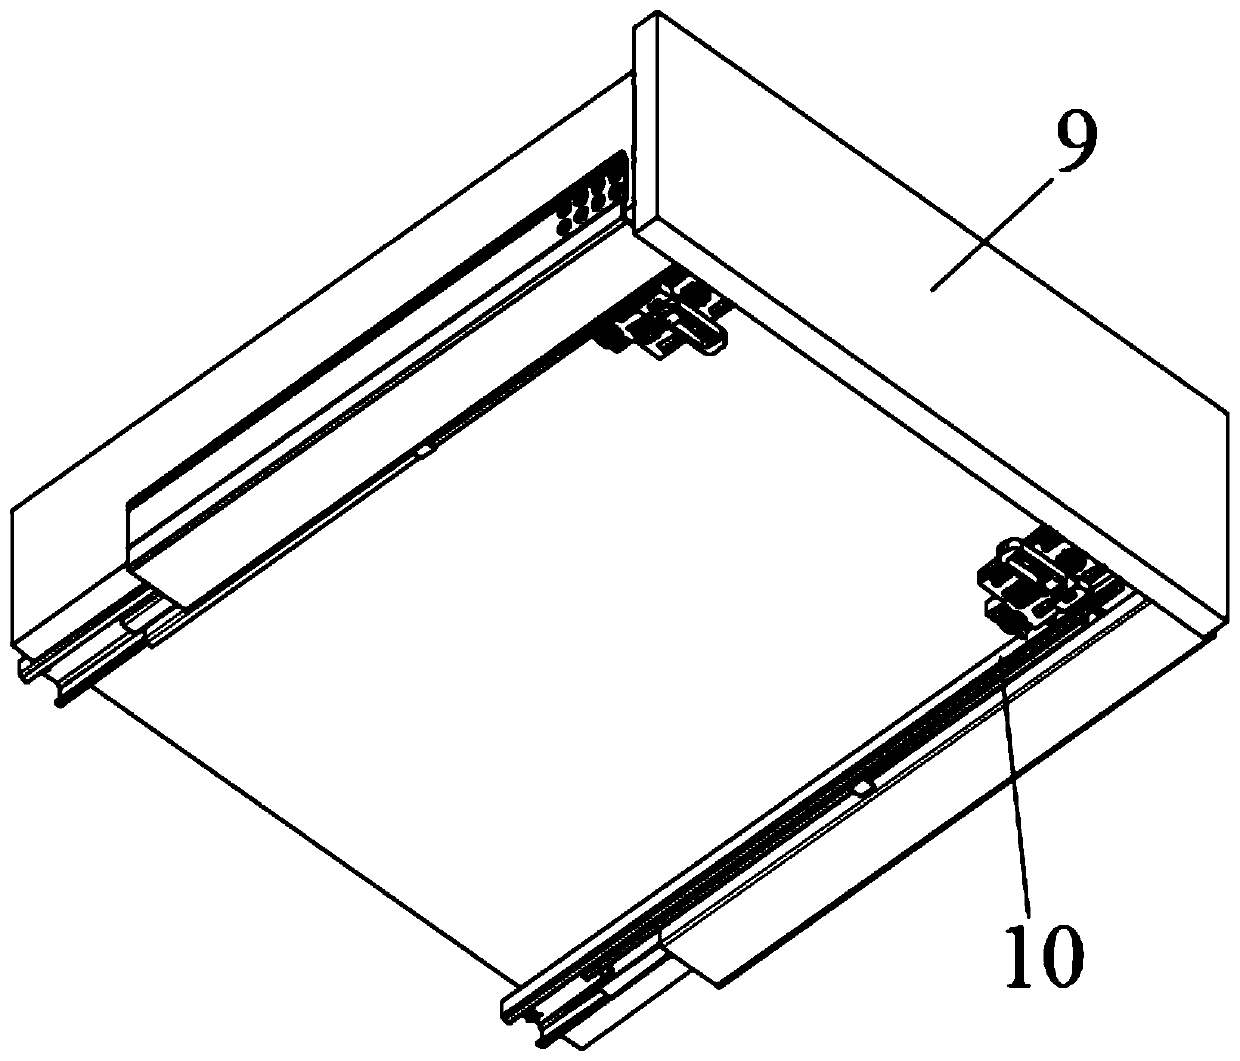 Drawer slide rail fast-dismounting structure